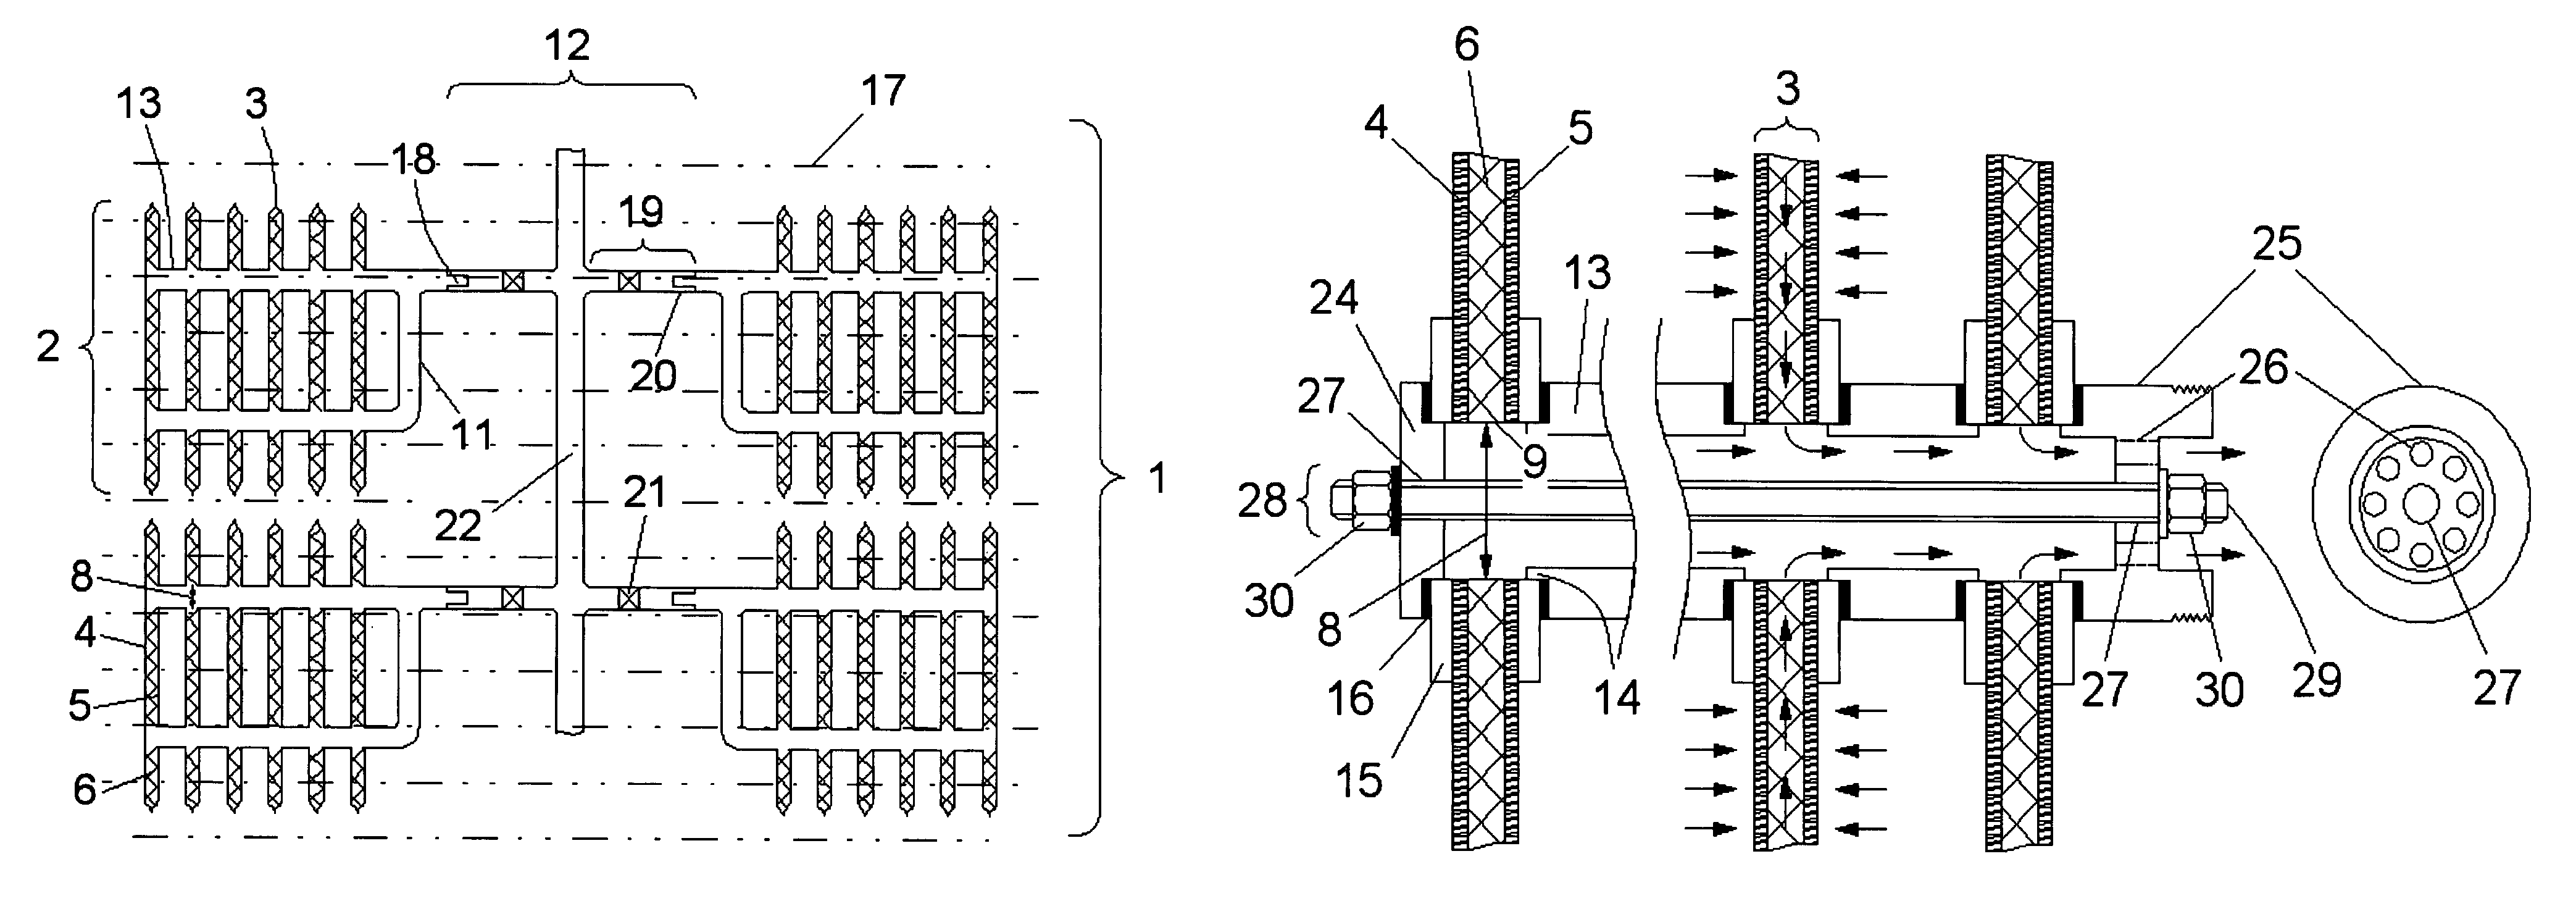 Apparatus for filtering substances out of liquids